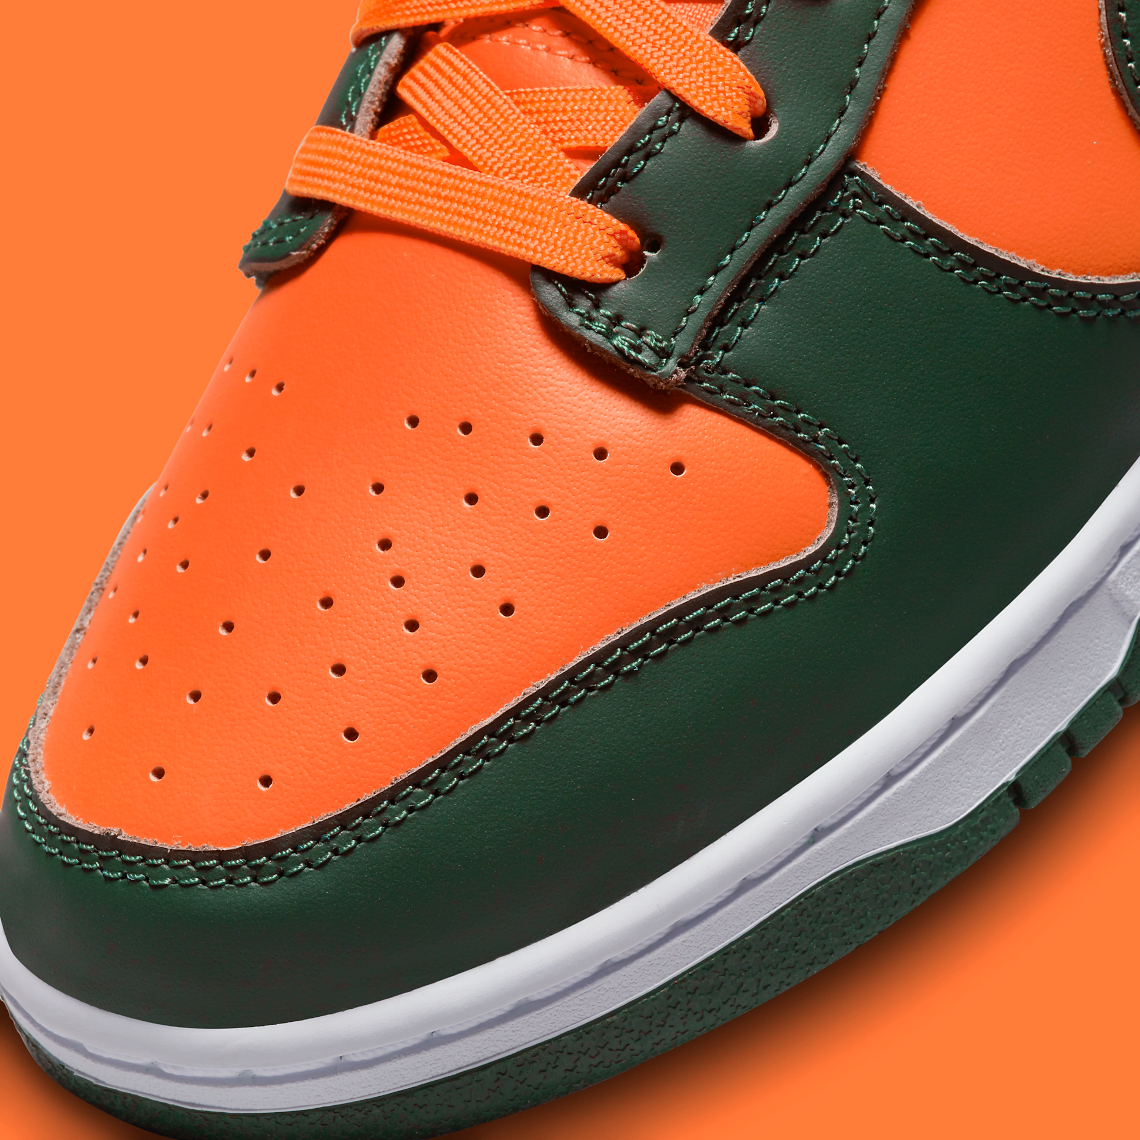 The Miami Hurricanes Nike Dunk Low Release Date - Sneaker News